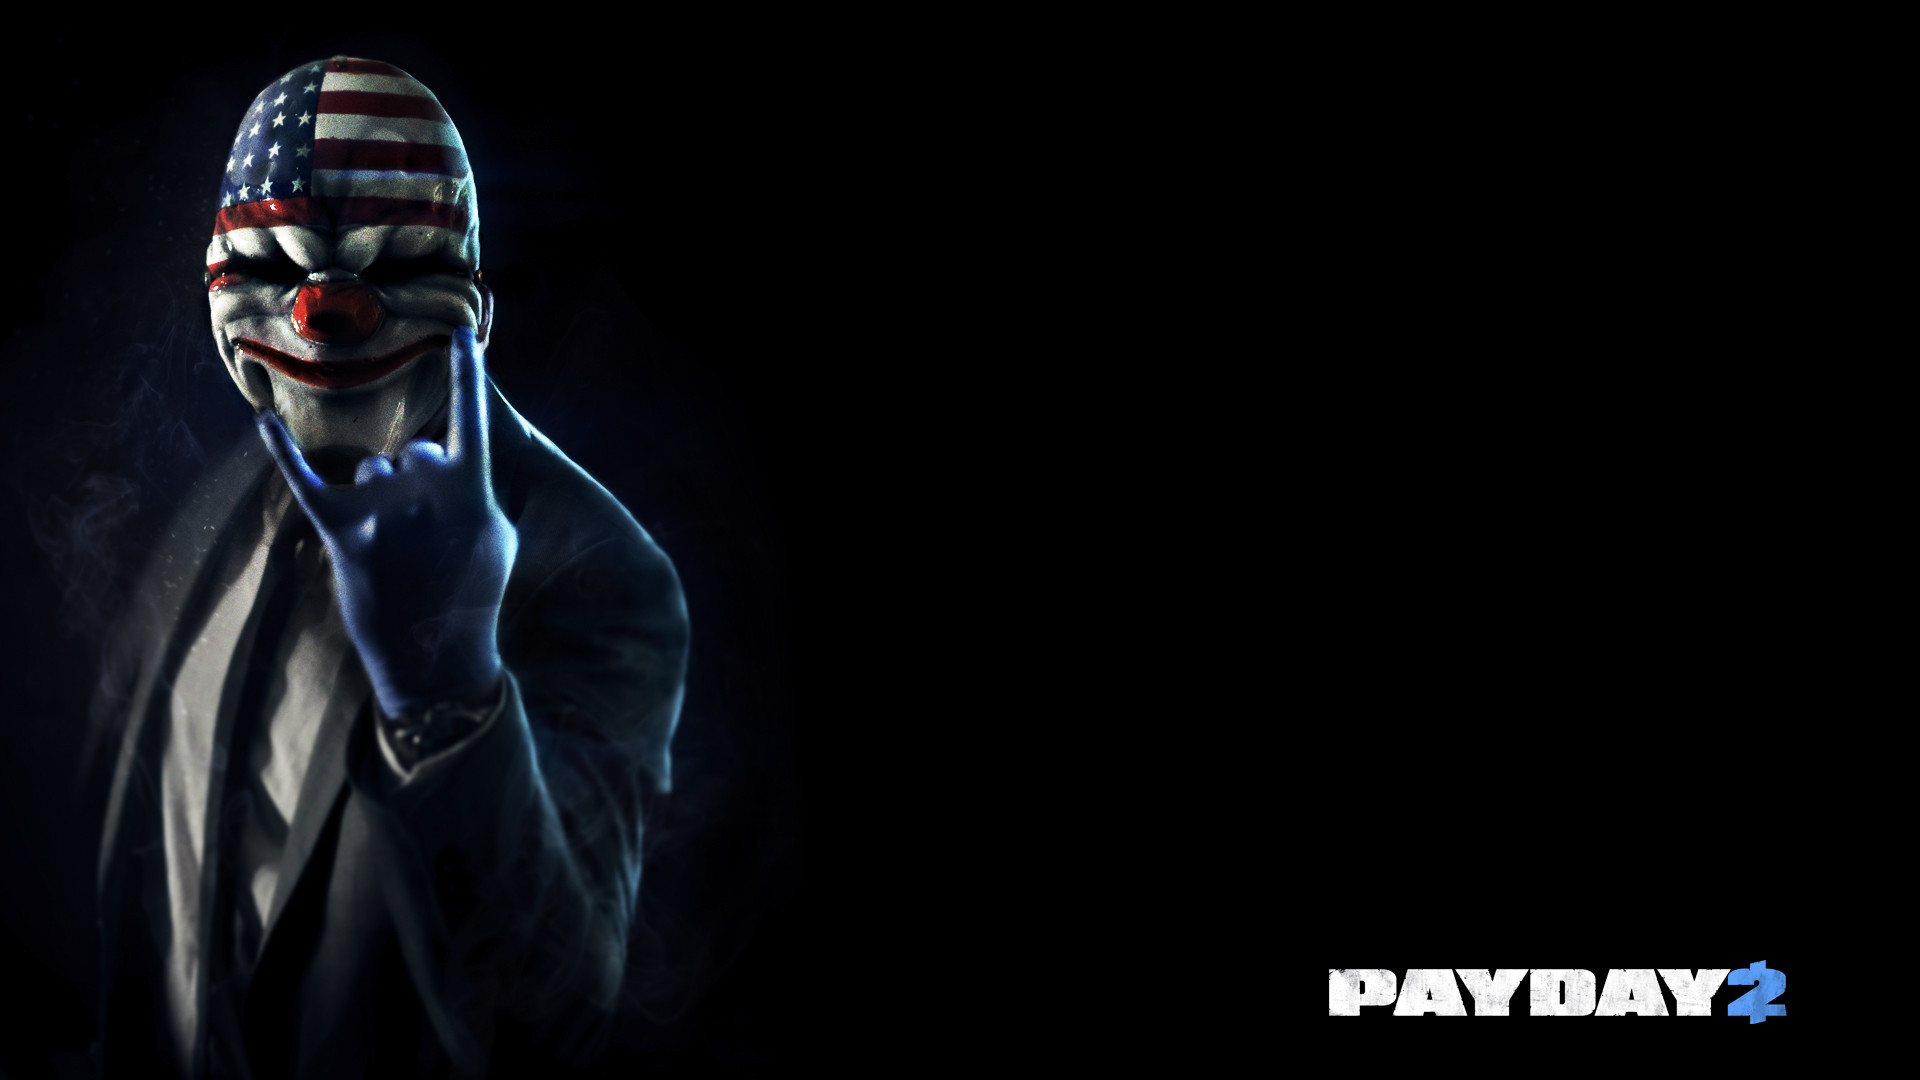 Dallas Payday Payday 1920x1080